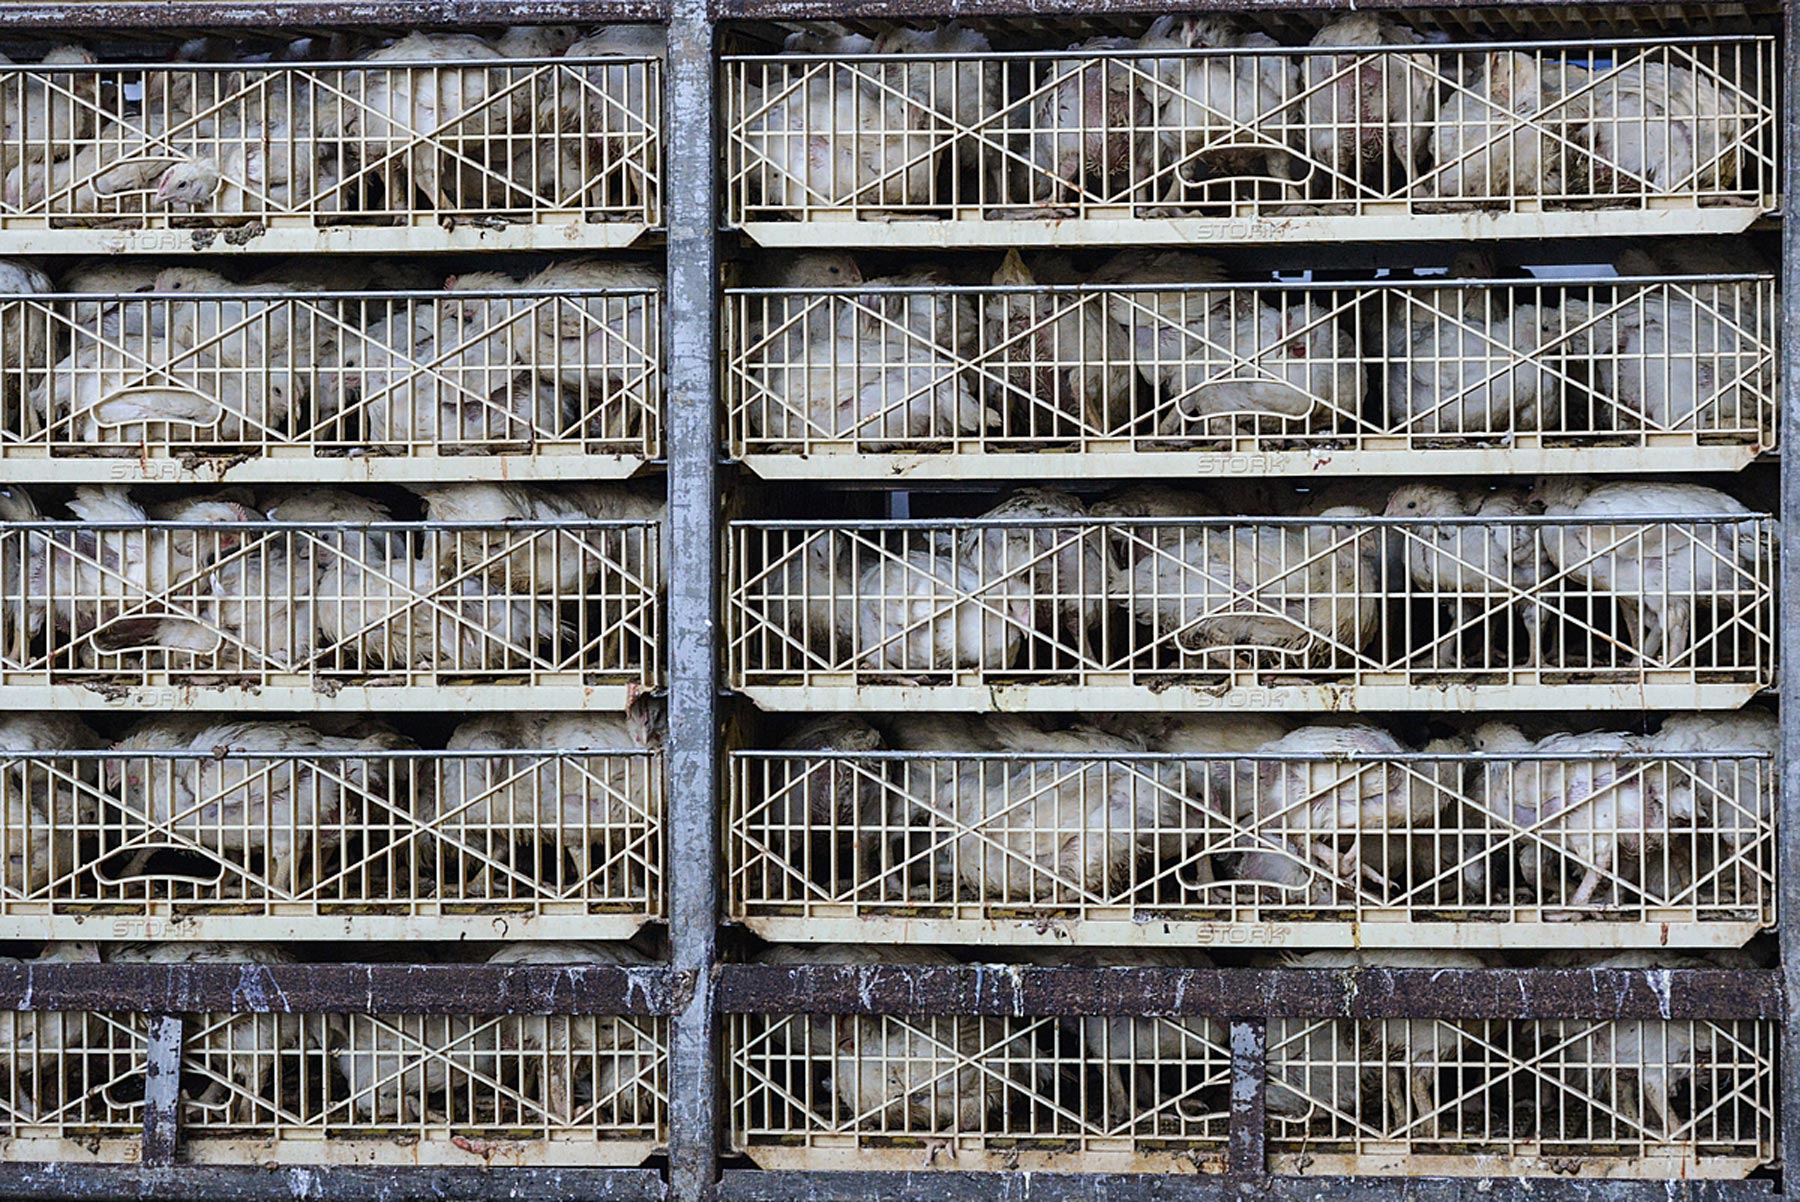 Broiler chickens awaiting slaughter.